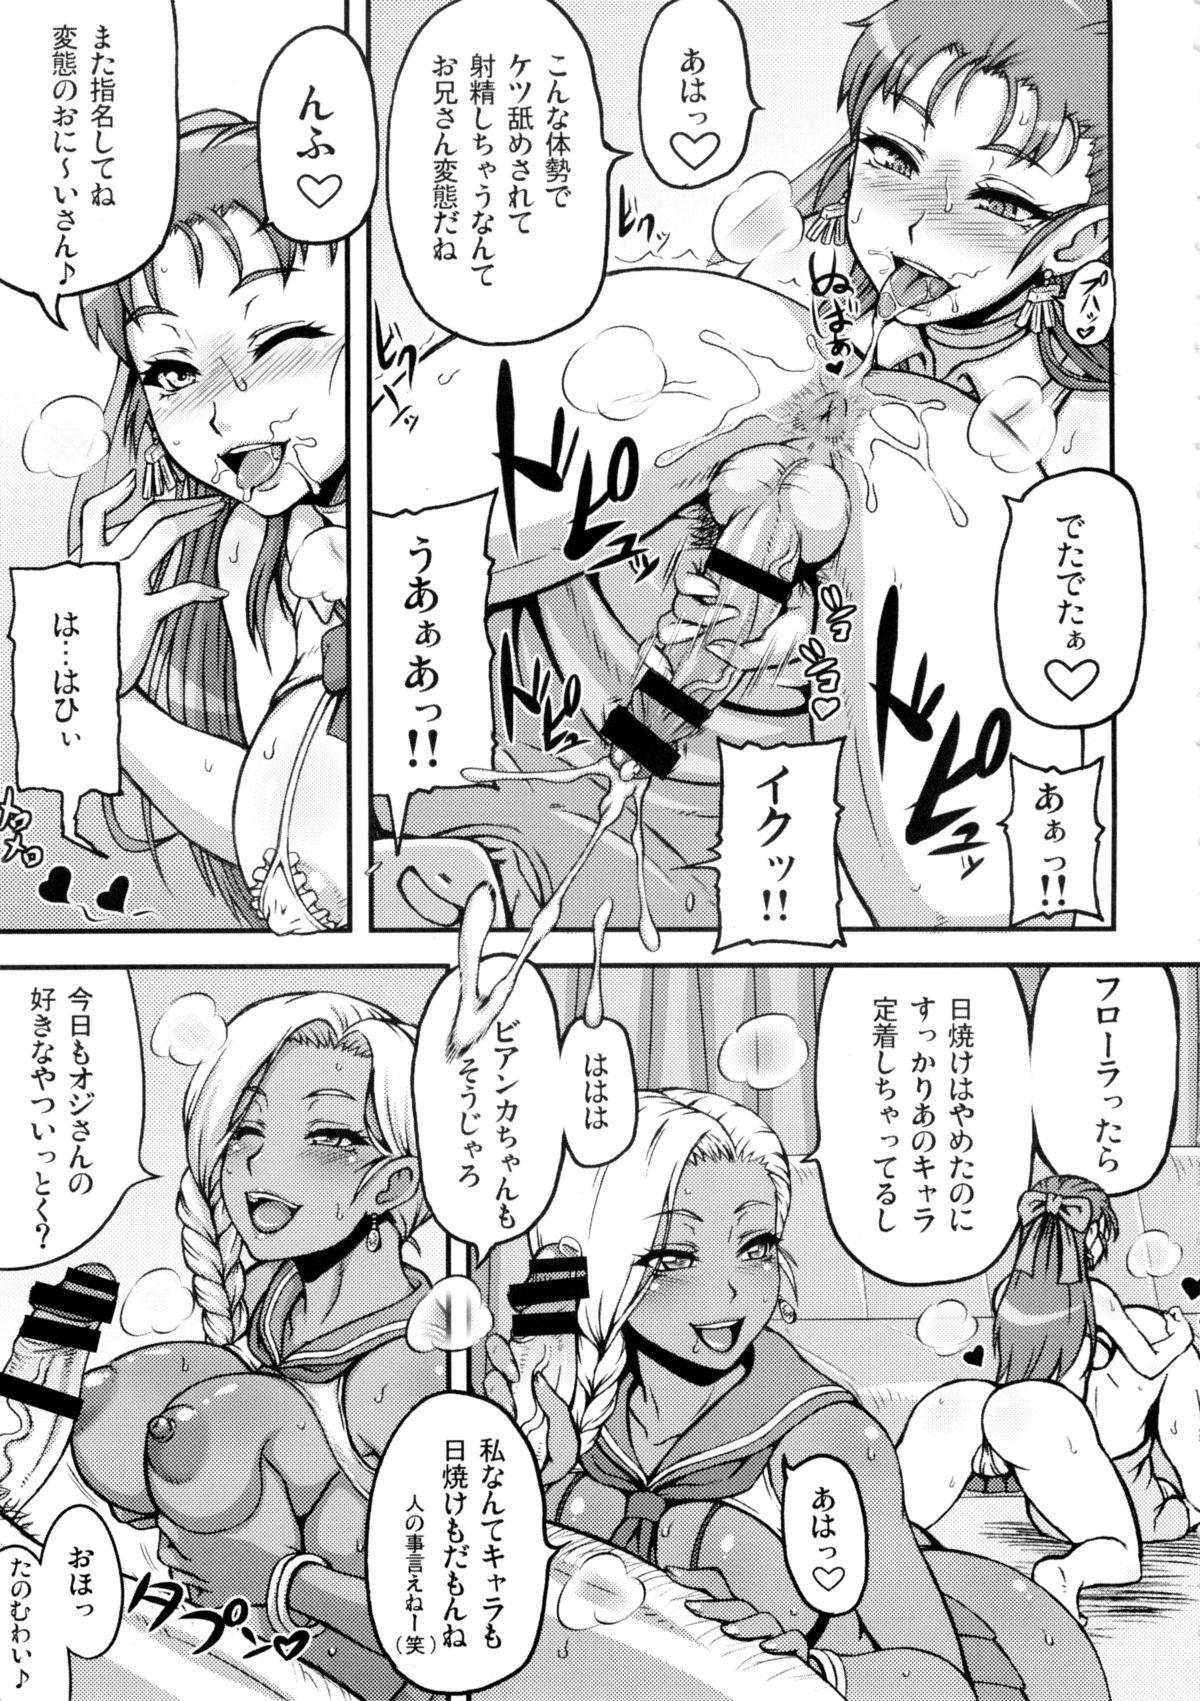 Lover Dragon Queen's 3 - Dragon quest v Gay 3some - Page 4